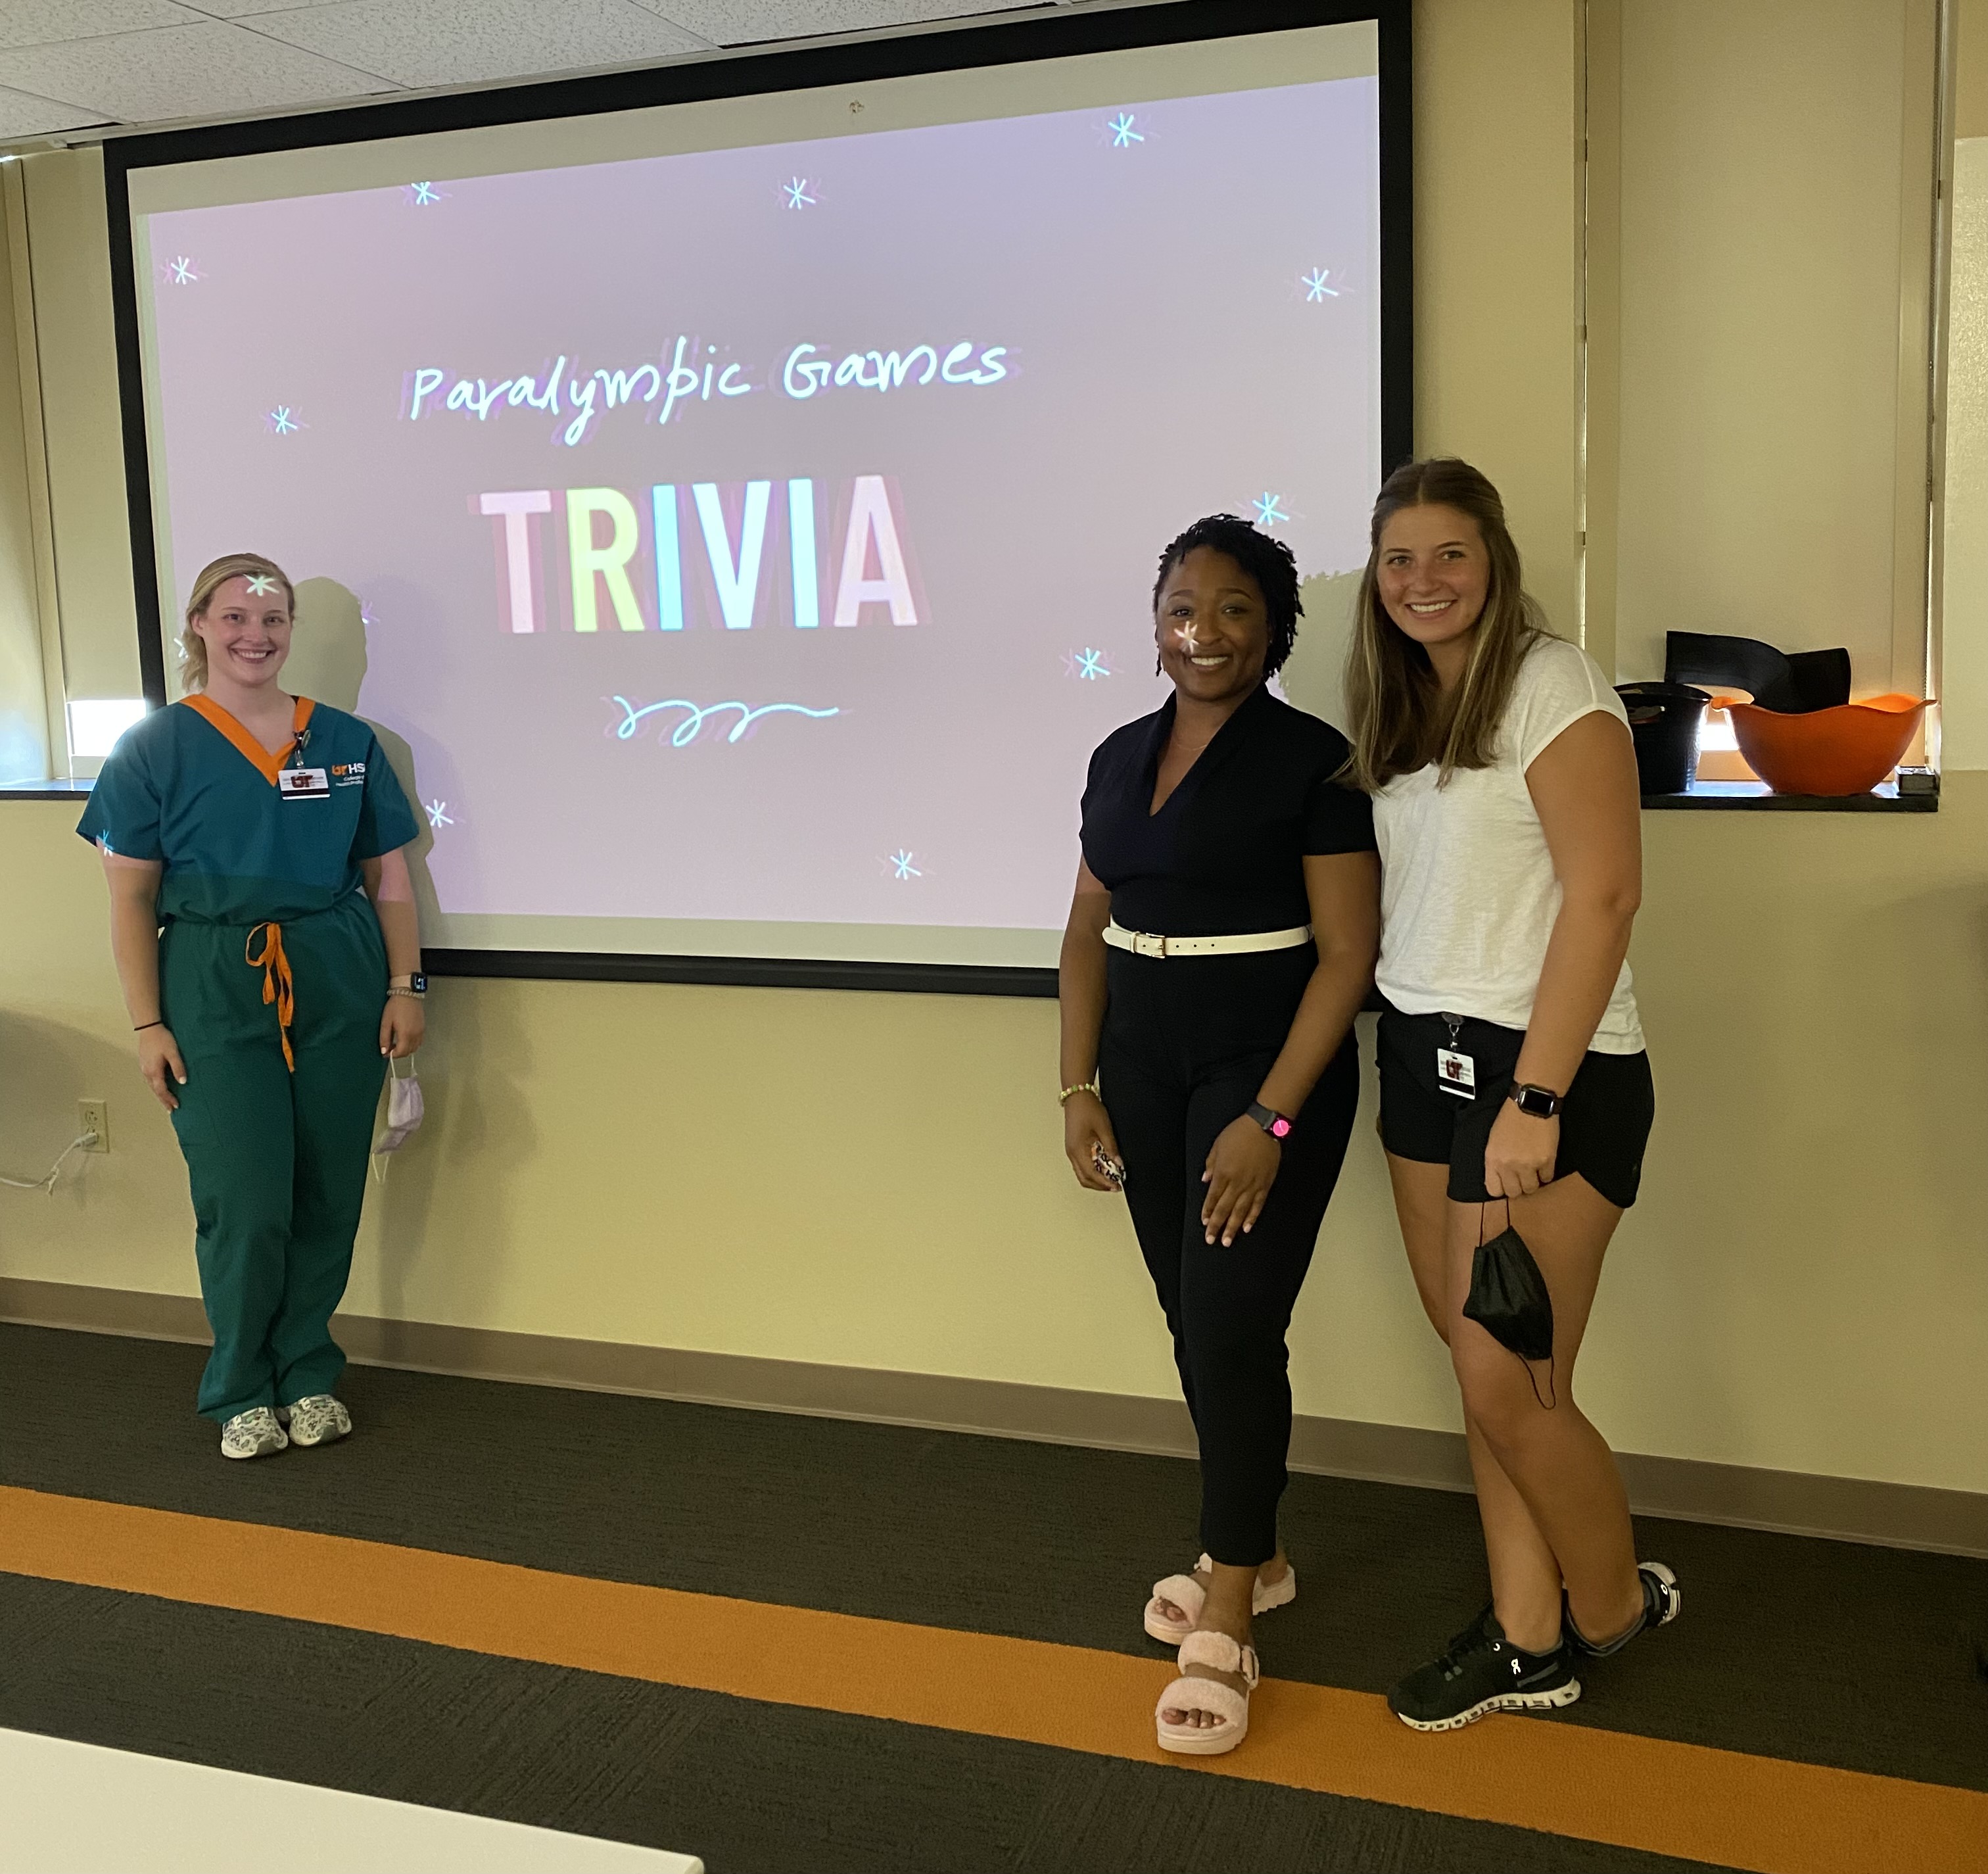 cotad members and projector screen with trivia game